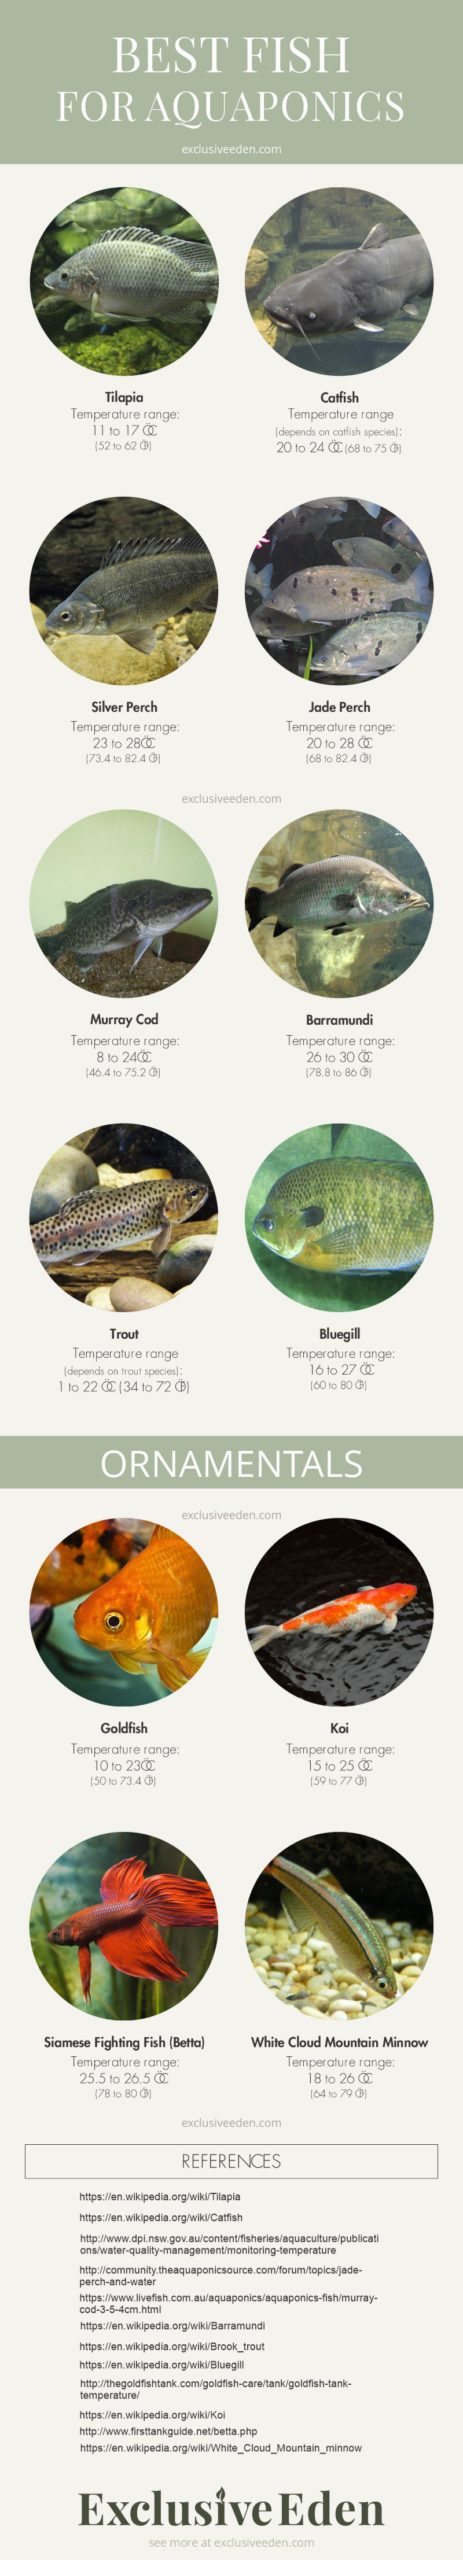 Little guide to some recommended fish for aquaponics.